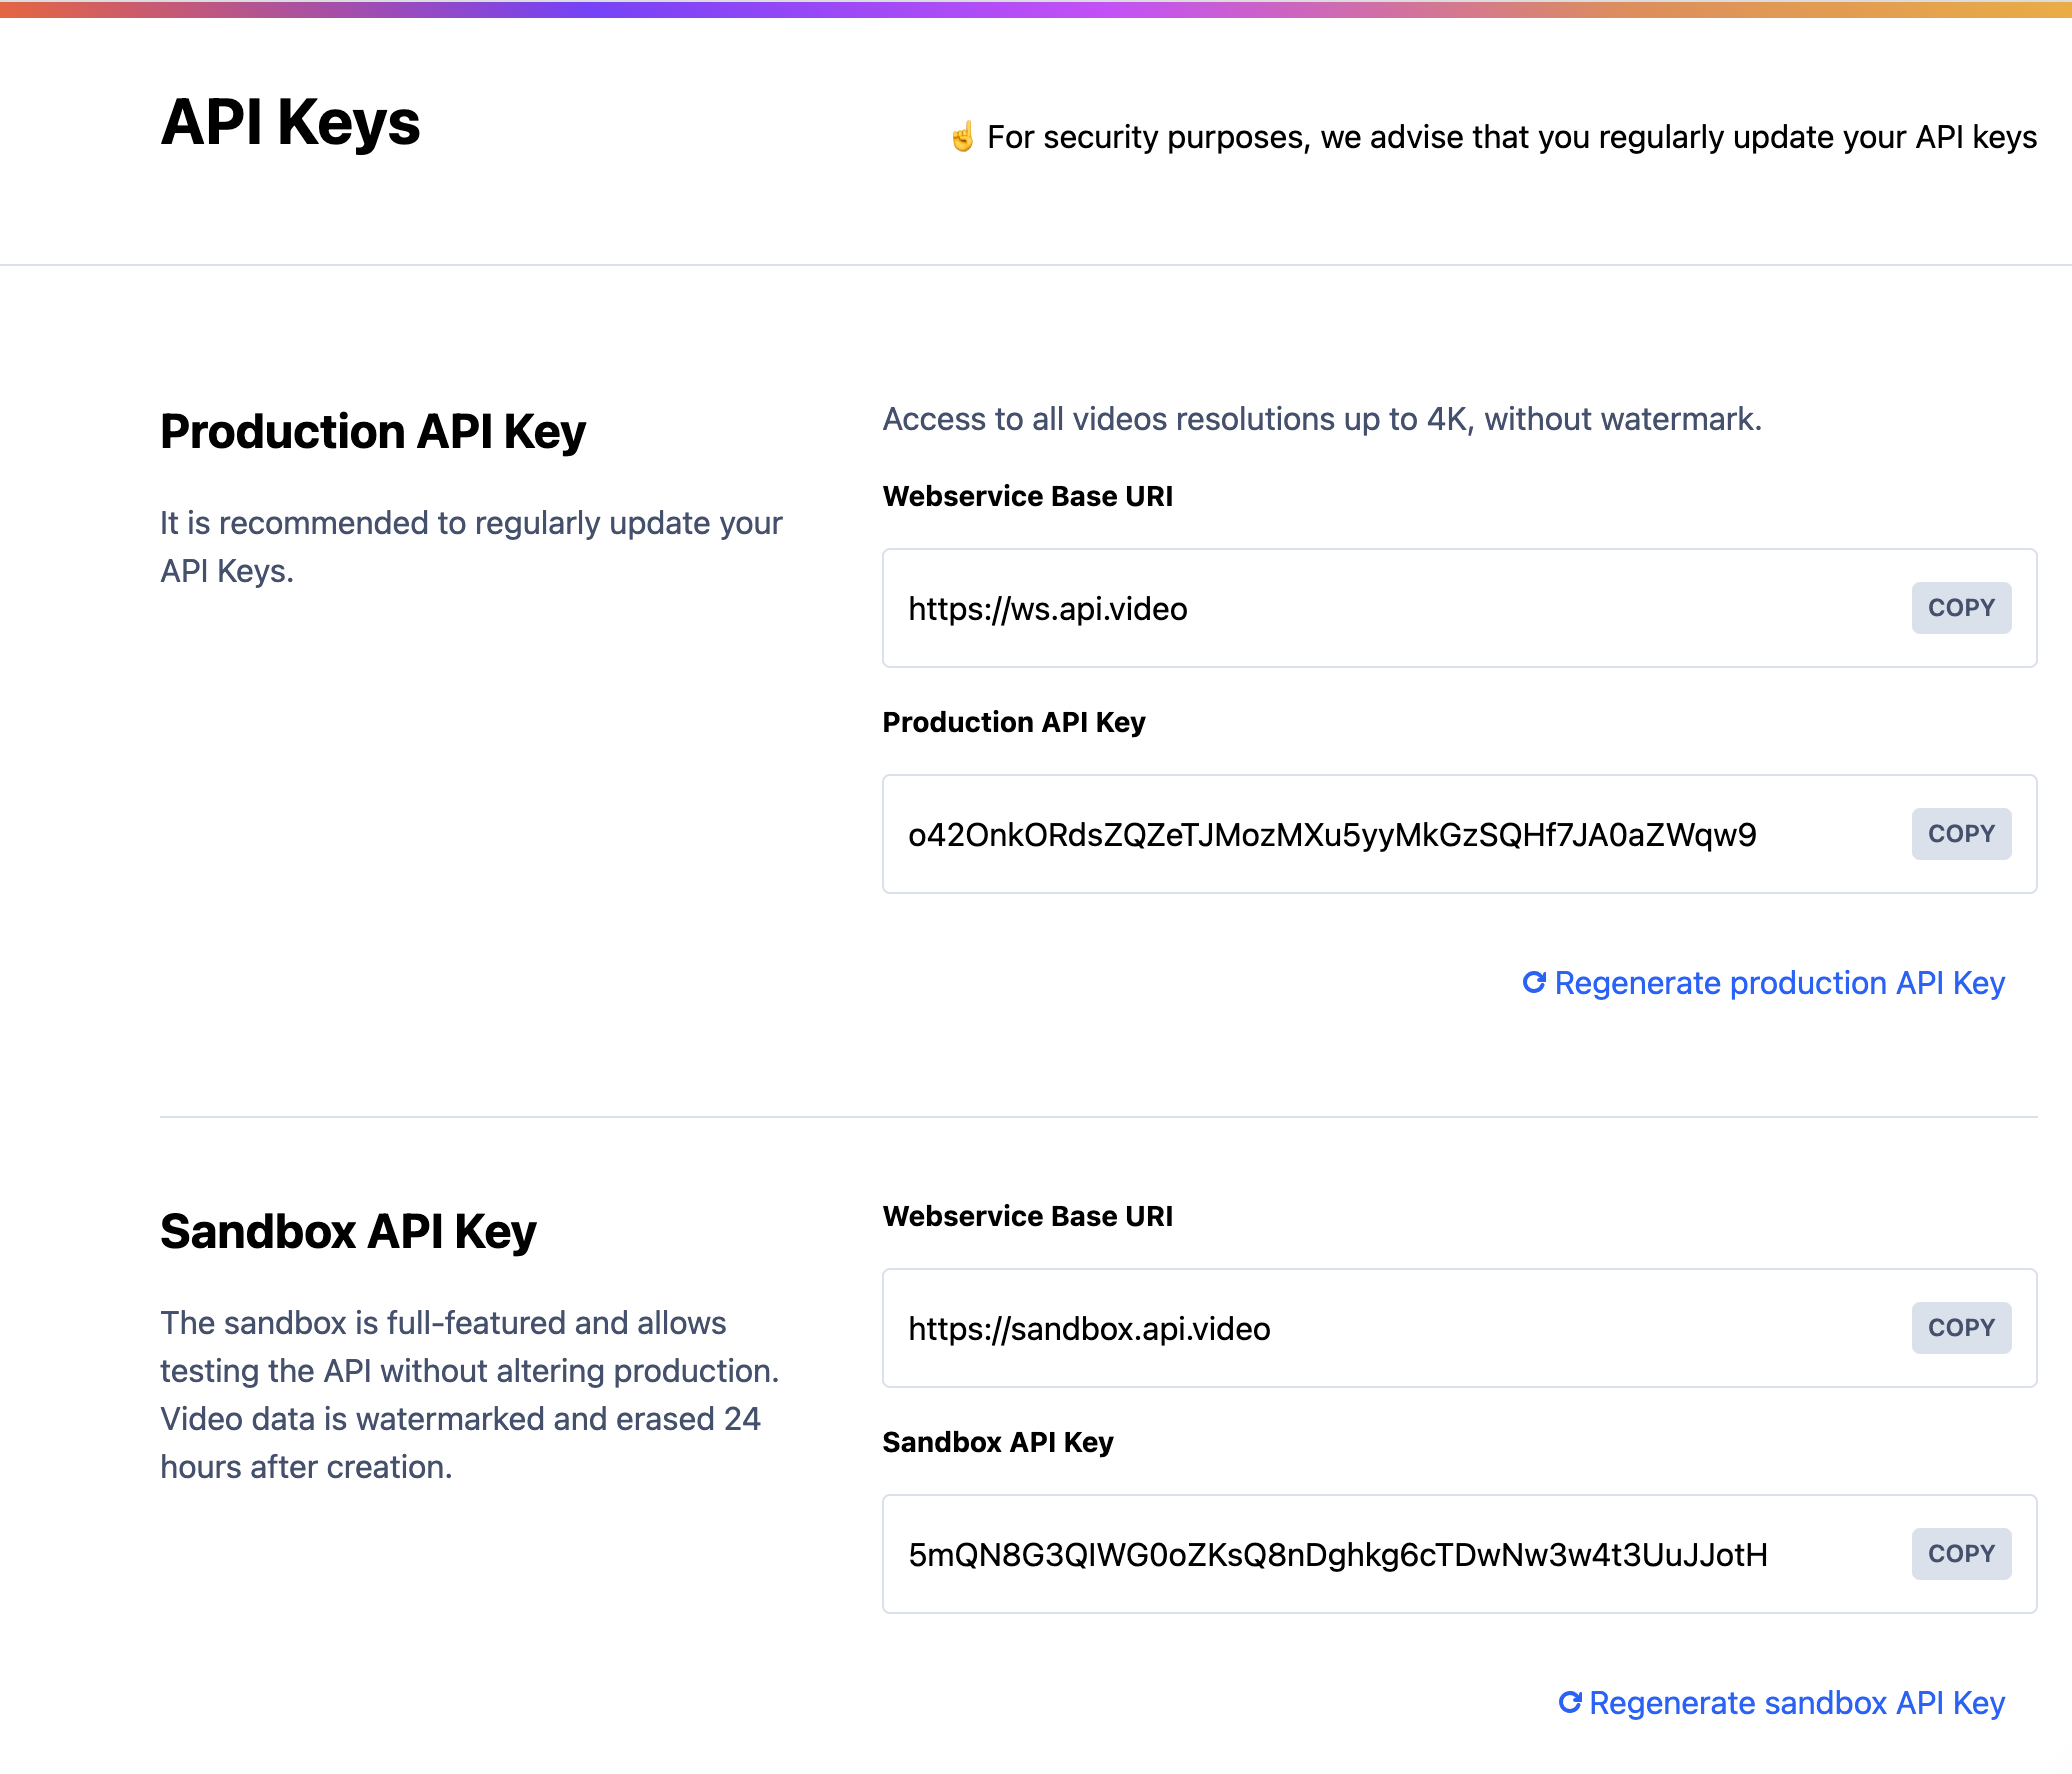 The view to access and manage your Sandbox and Production API Keys